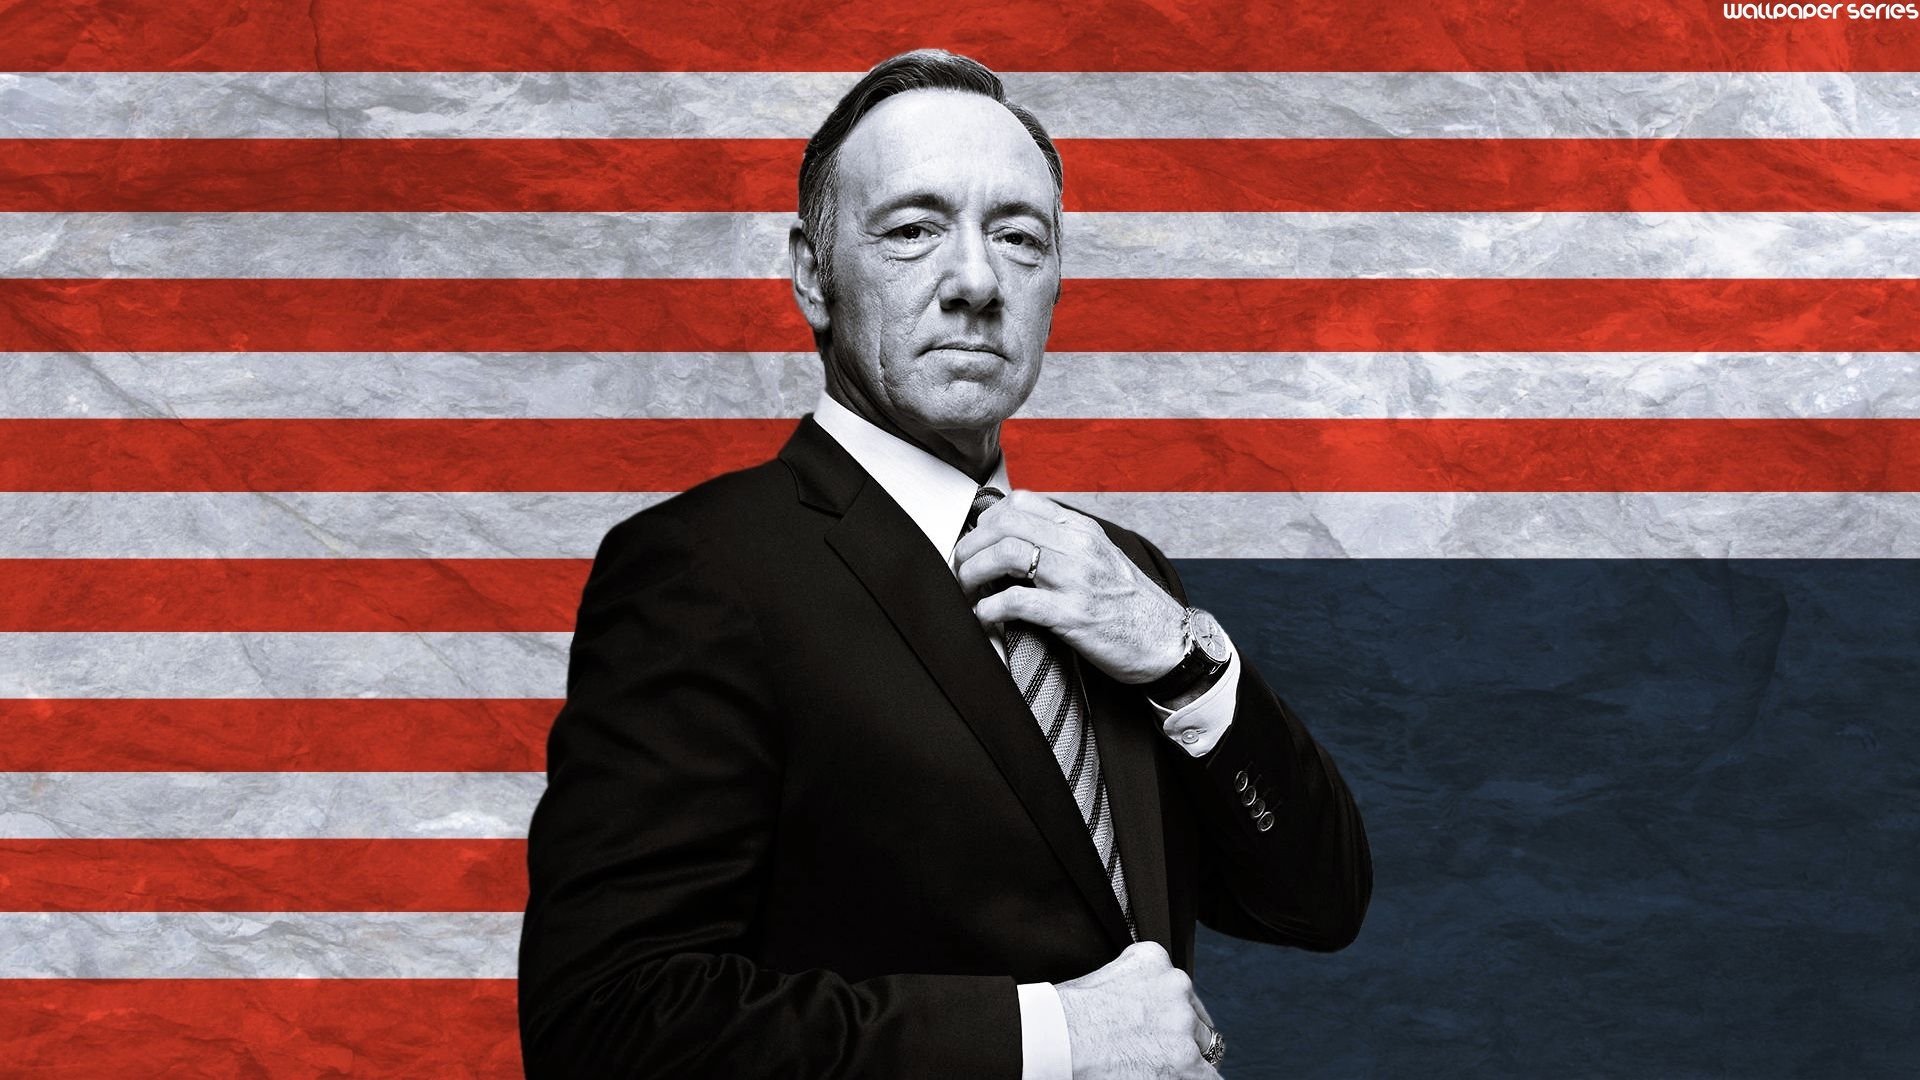 House Of Cards #10